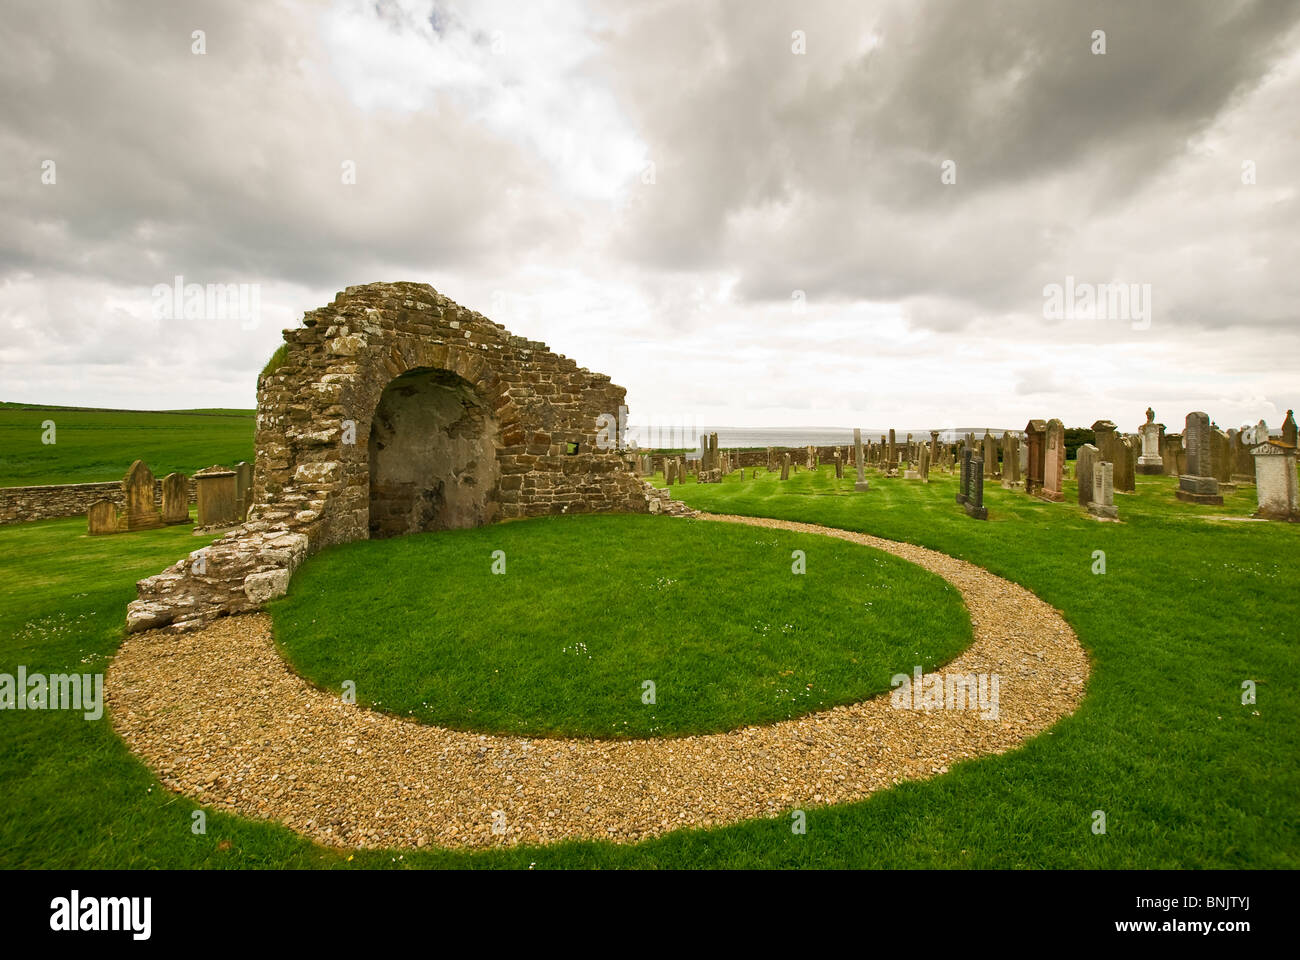 The Round Kirk (Round Church) in Orphir, Orkney. Stock Photo